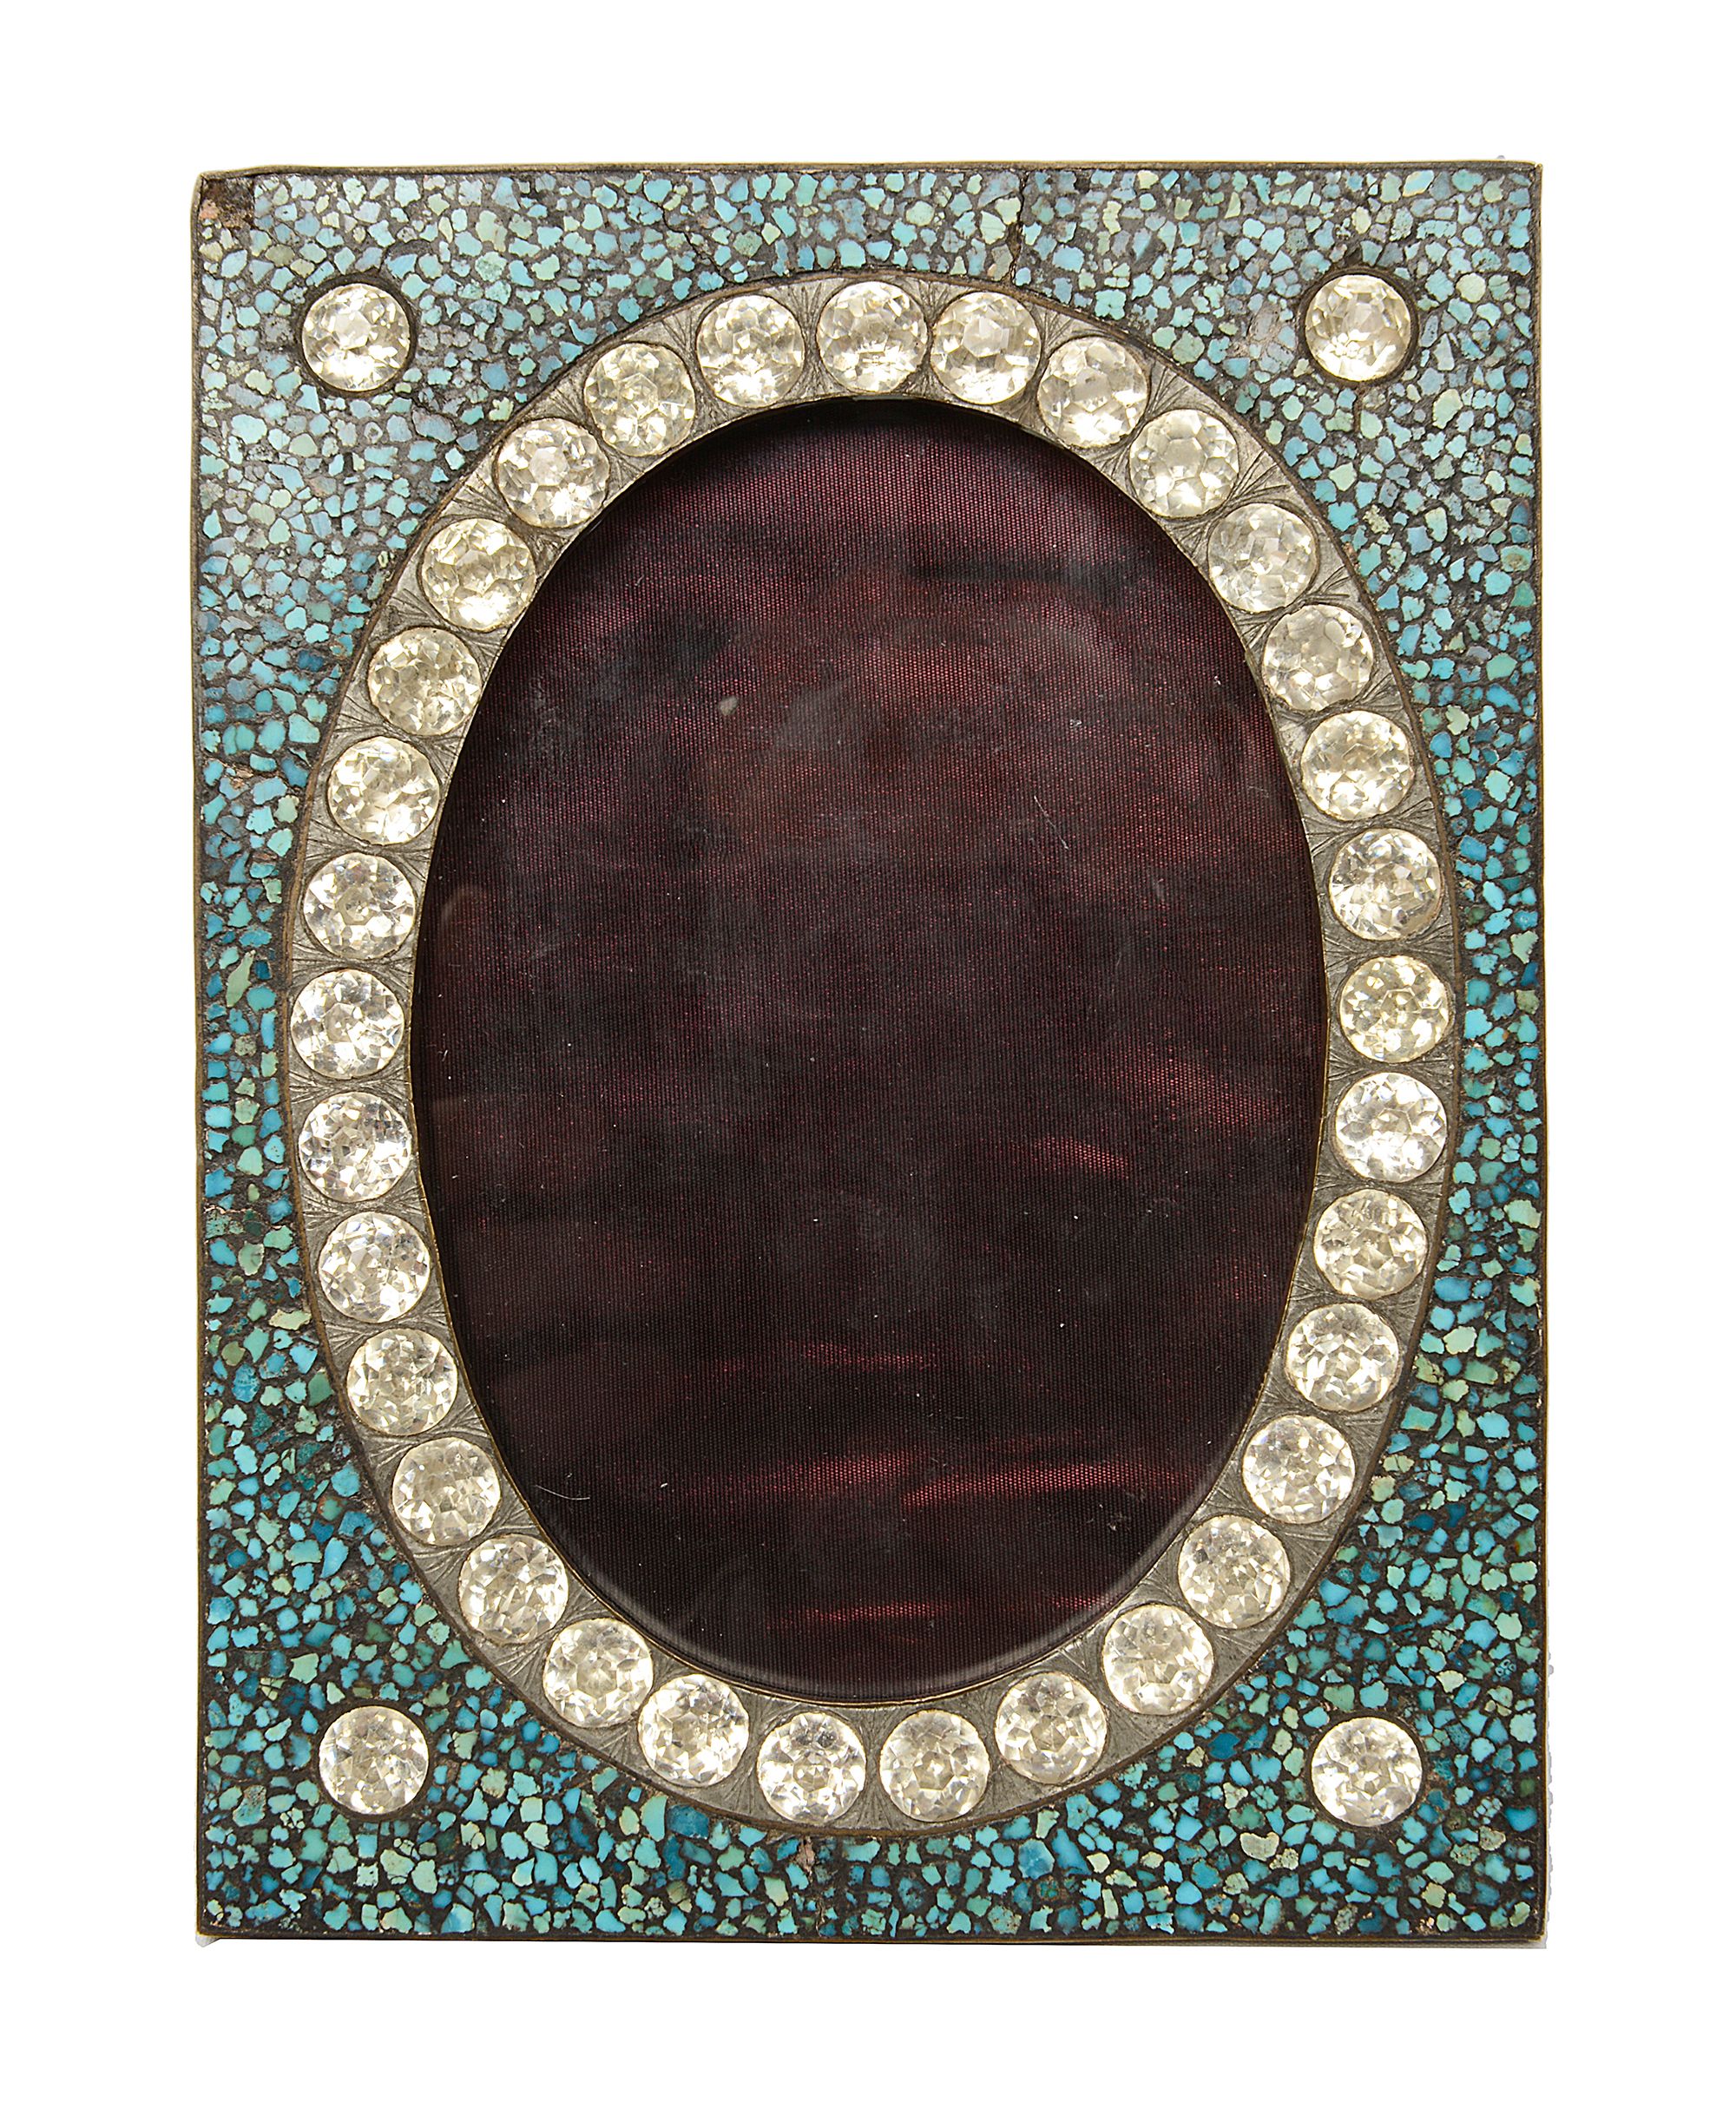 An Indian turquoise micromosaic inlaid and paste photograph frame c.1930